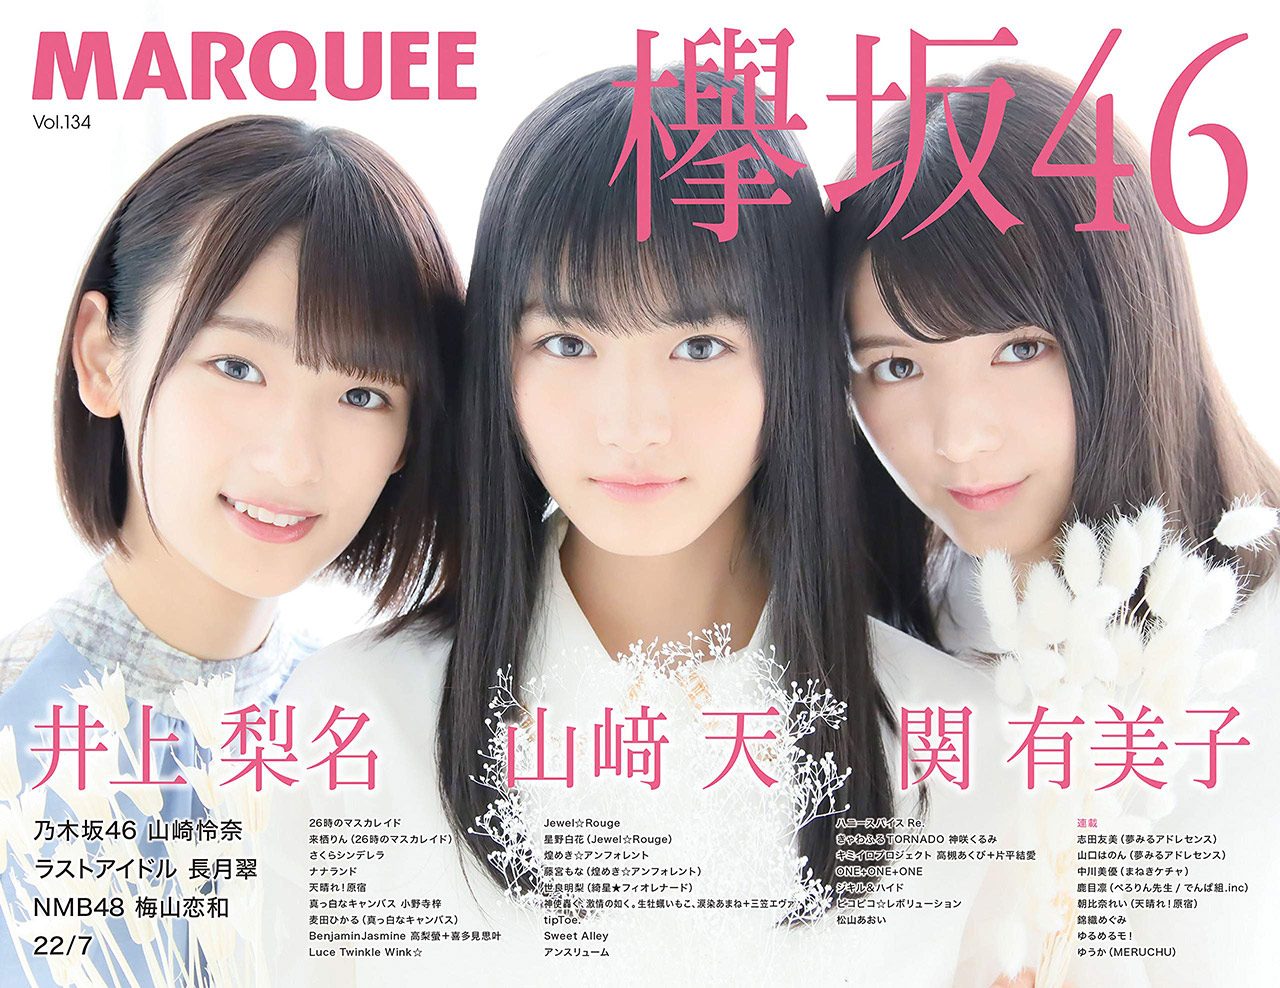 MARQUEE Vol.134